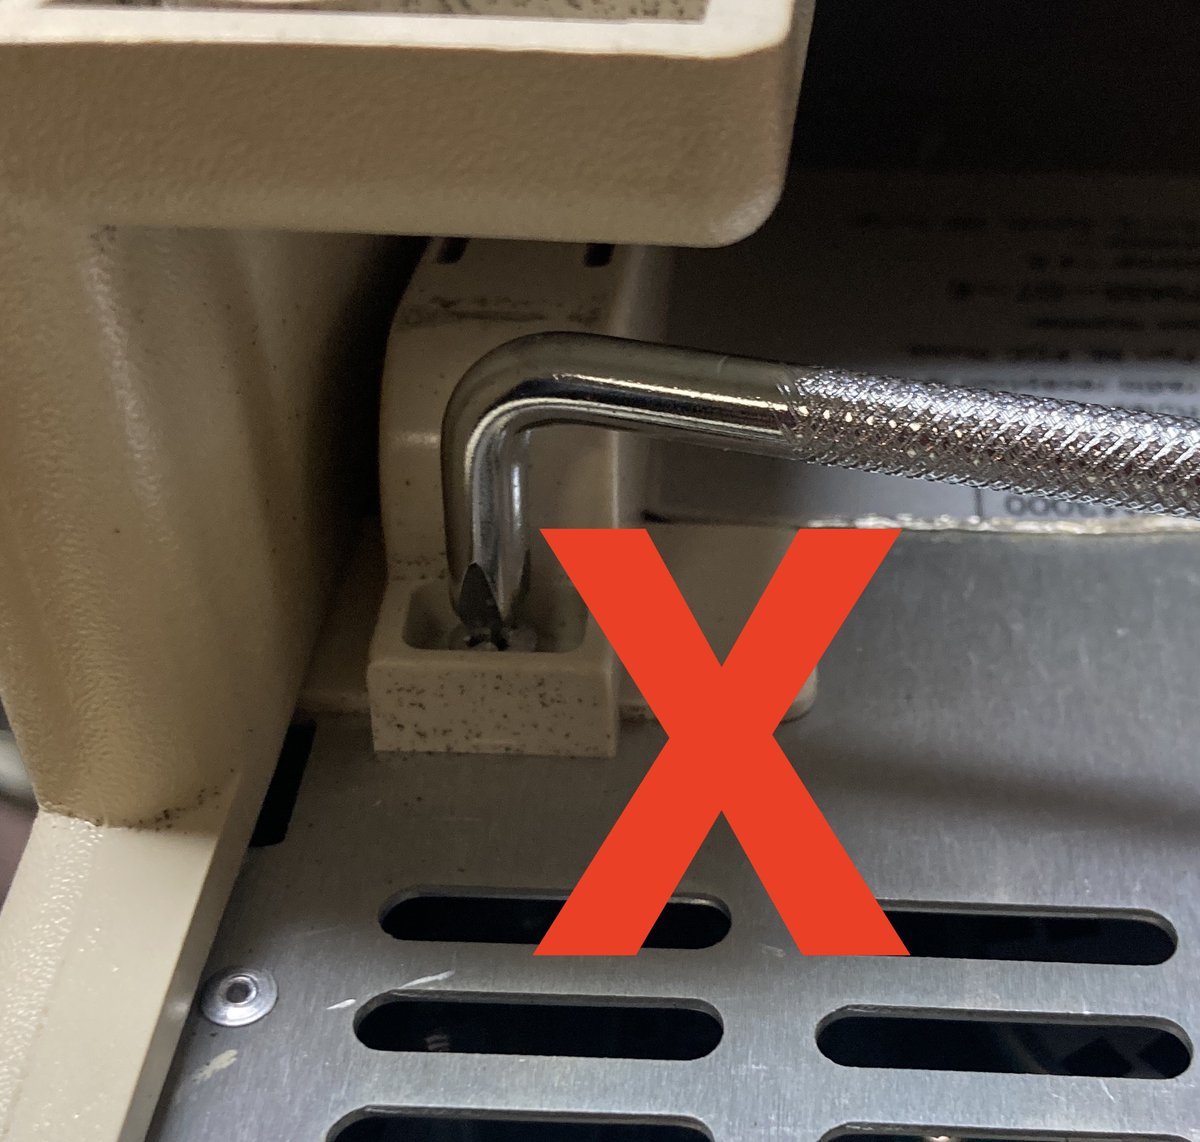 FYI, if you are taking apart a Dynalogic Hyperion, there are only six screws to worry about: two flathead captive in the handle, two Phillips on the bottom, and these sneaky Phils on the bottom-side. Don't bother trying to remove the hard-to-reach ones. #retrocomputing